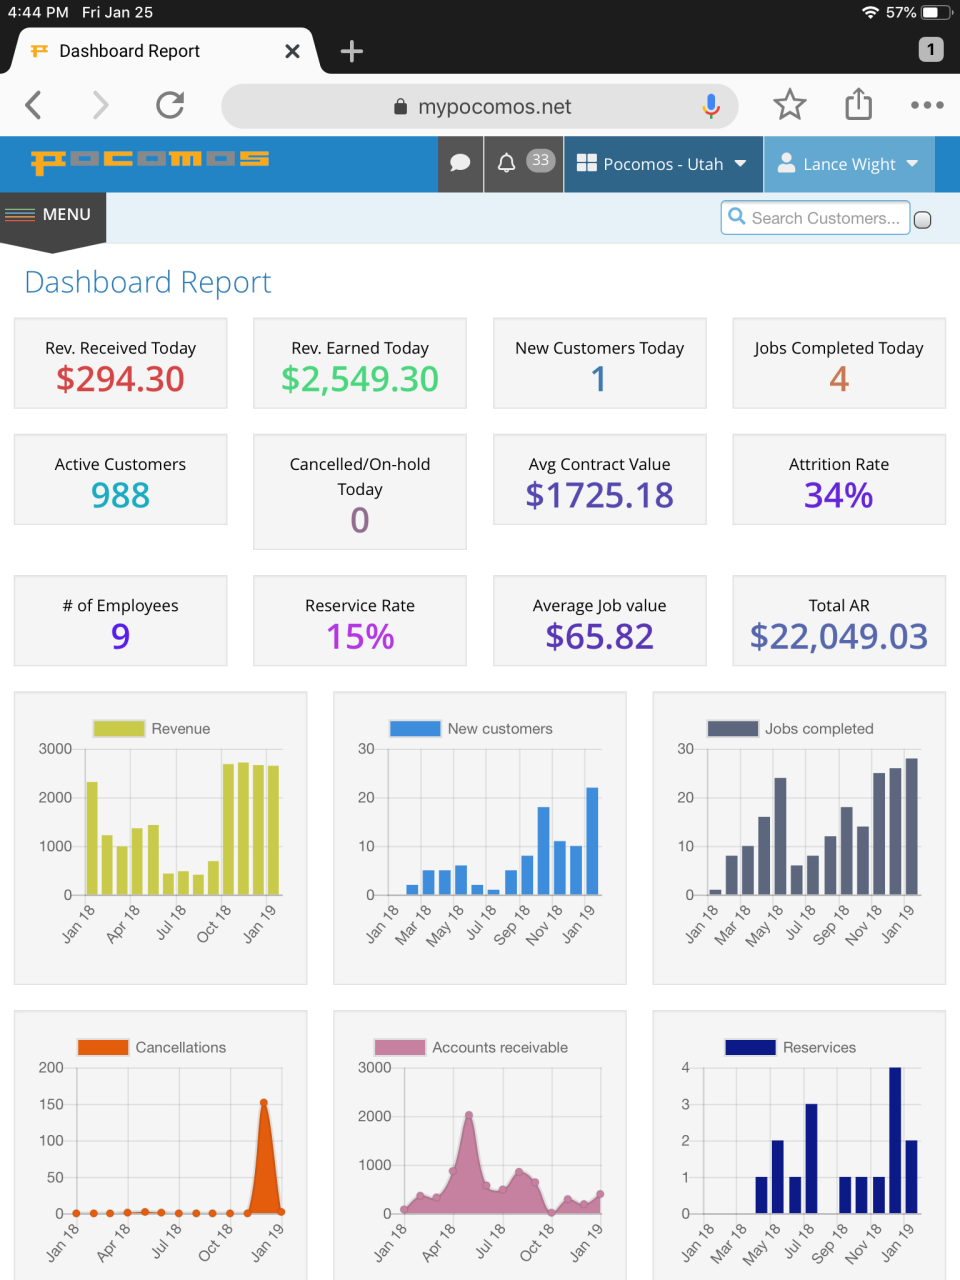 Pocomos Software - Stay up to date with business performance metrics with reports on revenue, sales, jobs complete, and more